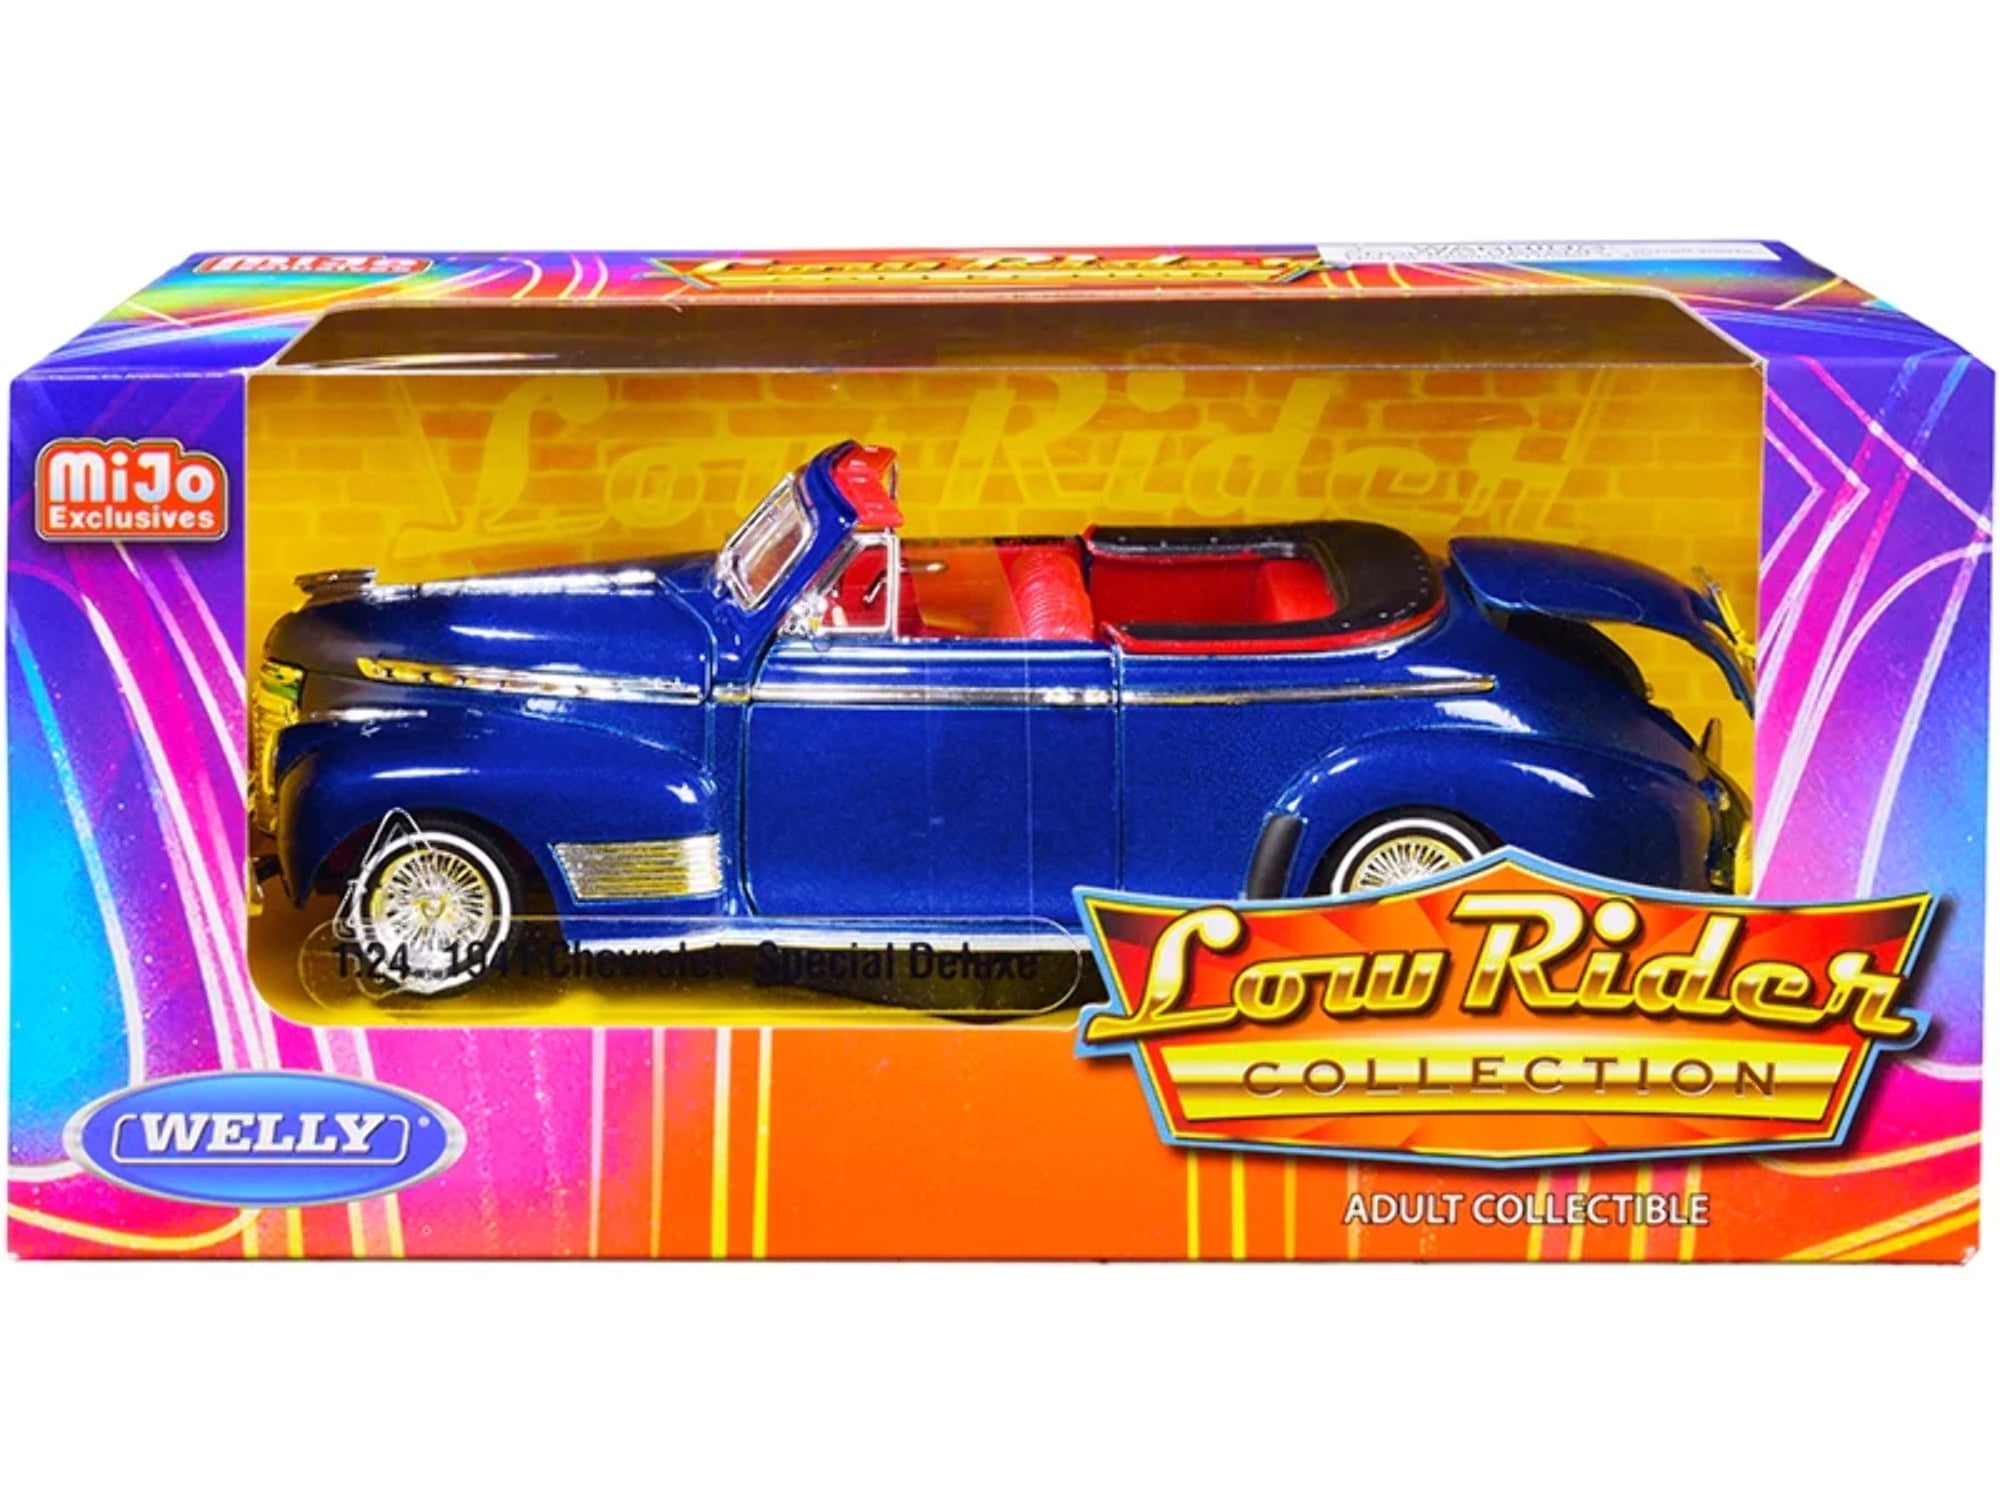 22411LRW-bl 1-24 Scale Special Deluxe Convertible Candy 1941 Chevrolet Diecast Model Car with Interior Low Rider Collection, Metallic Blue & Red -  WELLY